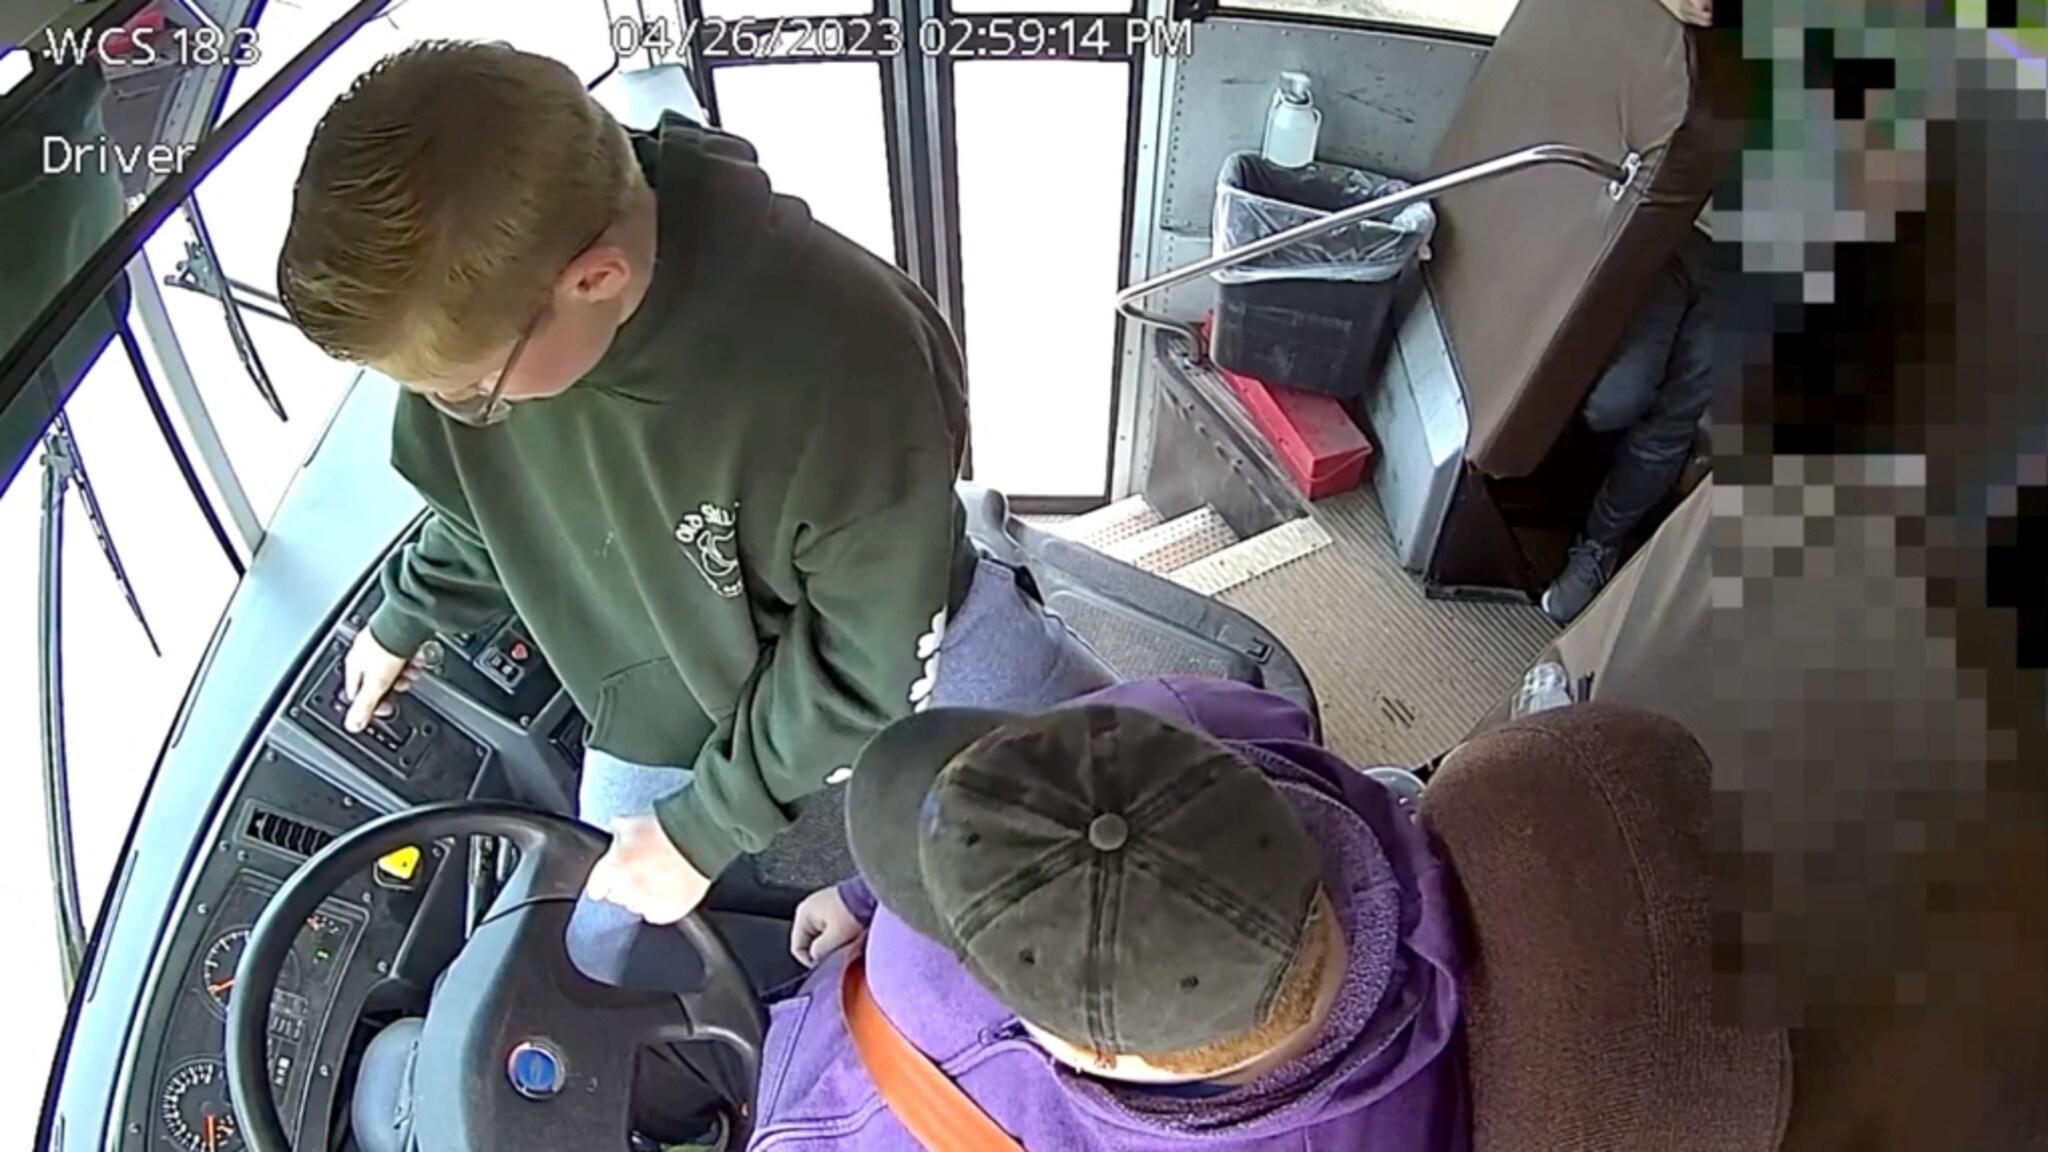 A boy in the US (13 years old) takes over as a bus driver who has become unwell